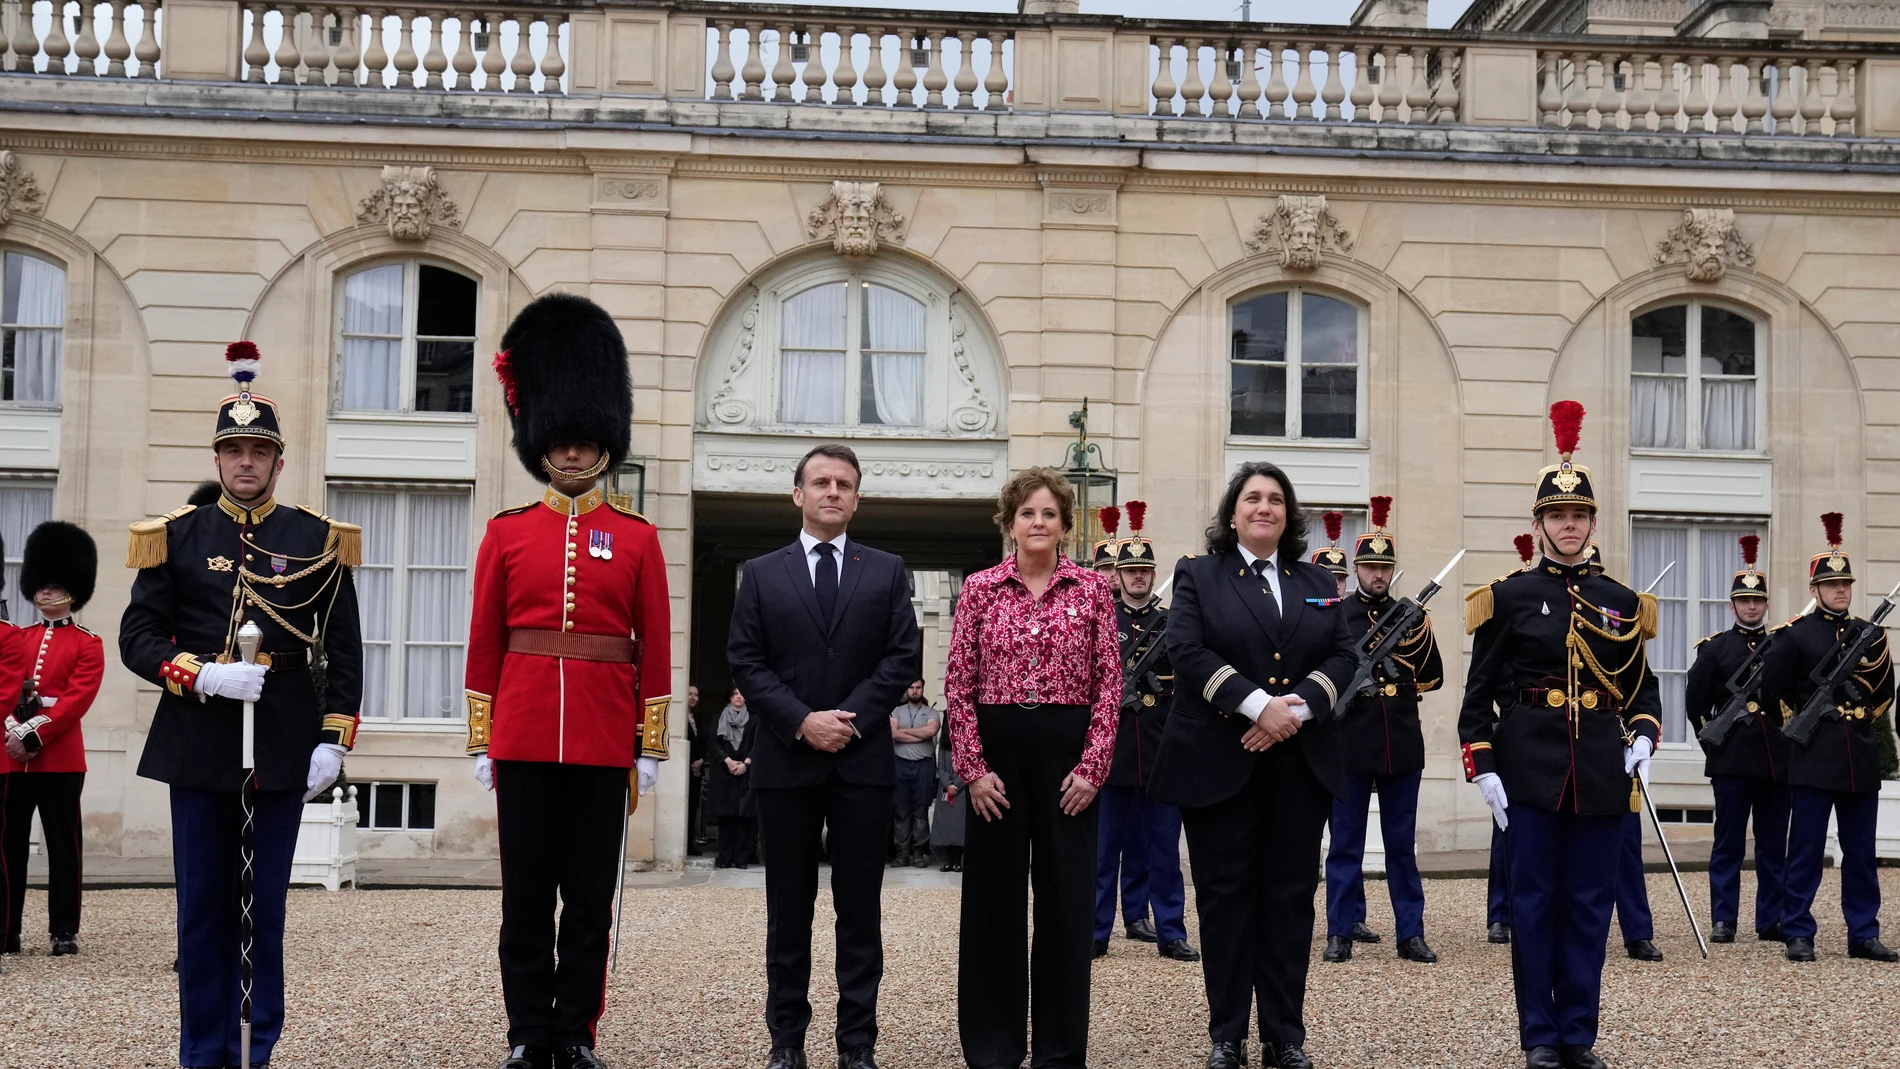 French President Emmanuel Macron and British ambassador to France Menna Rawlings, right left, pose at the Elysee Palace, Monday, April 8, 2024 in Paris. Sixteen soldiers from No 7 Company Coldstream Guards and 32 members of the Gendarmerie Garde Republicaine mount guard at the Elysee palace as British troops join French guards in a special ceremony at the Elysee Palace to celebrate 120 years of "entente cordiale" between the longtime rival powers. (AP Photo/Thibault Camus, Pool)